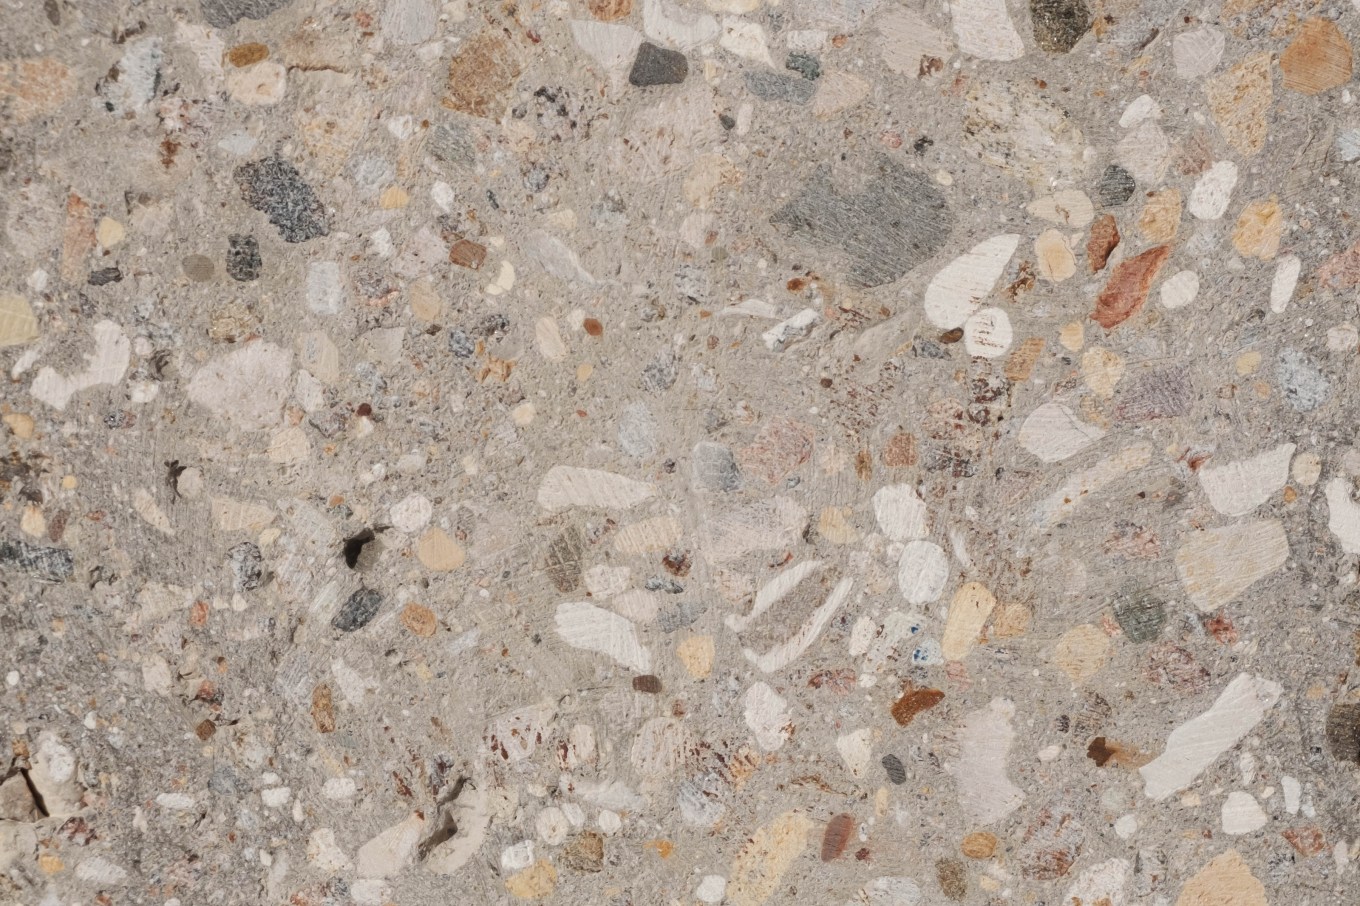 Grinded concrete textured with pebbles and small gravel stones.